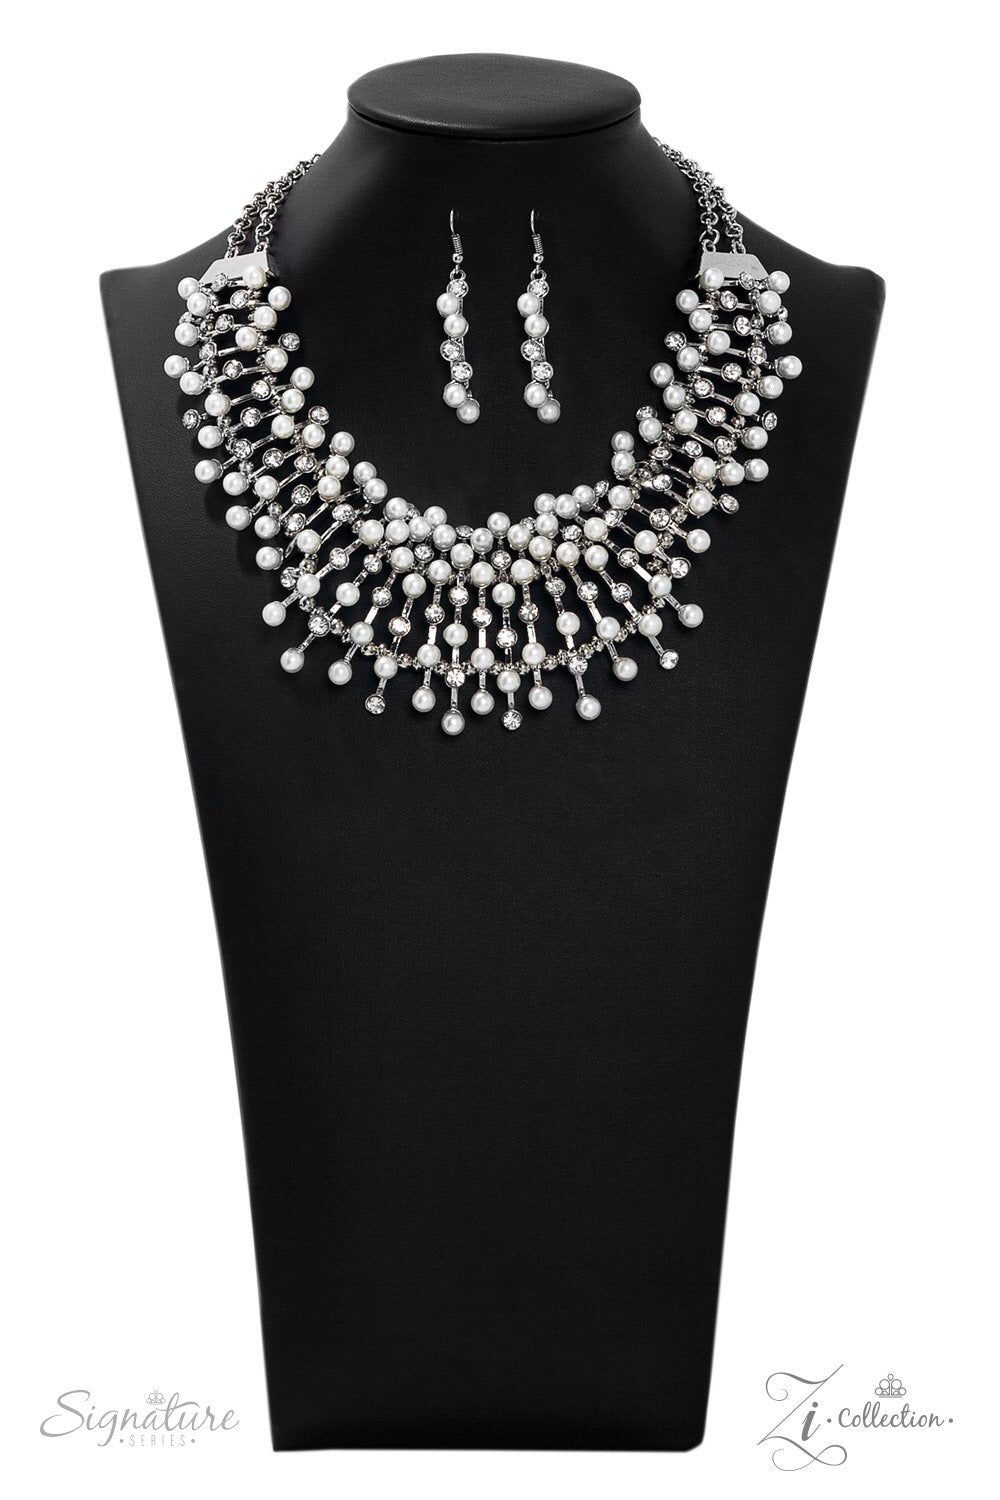 The Leanne-Zi Collection Necklace